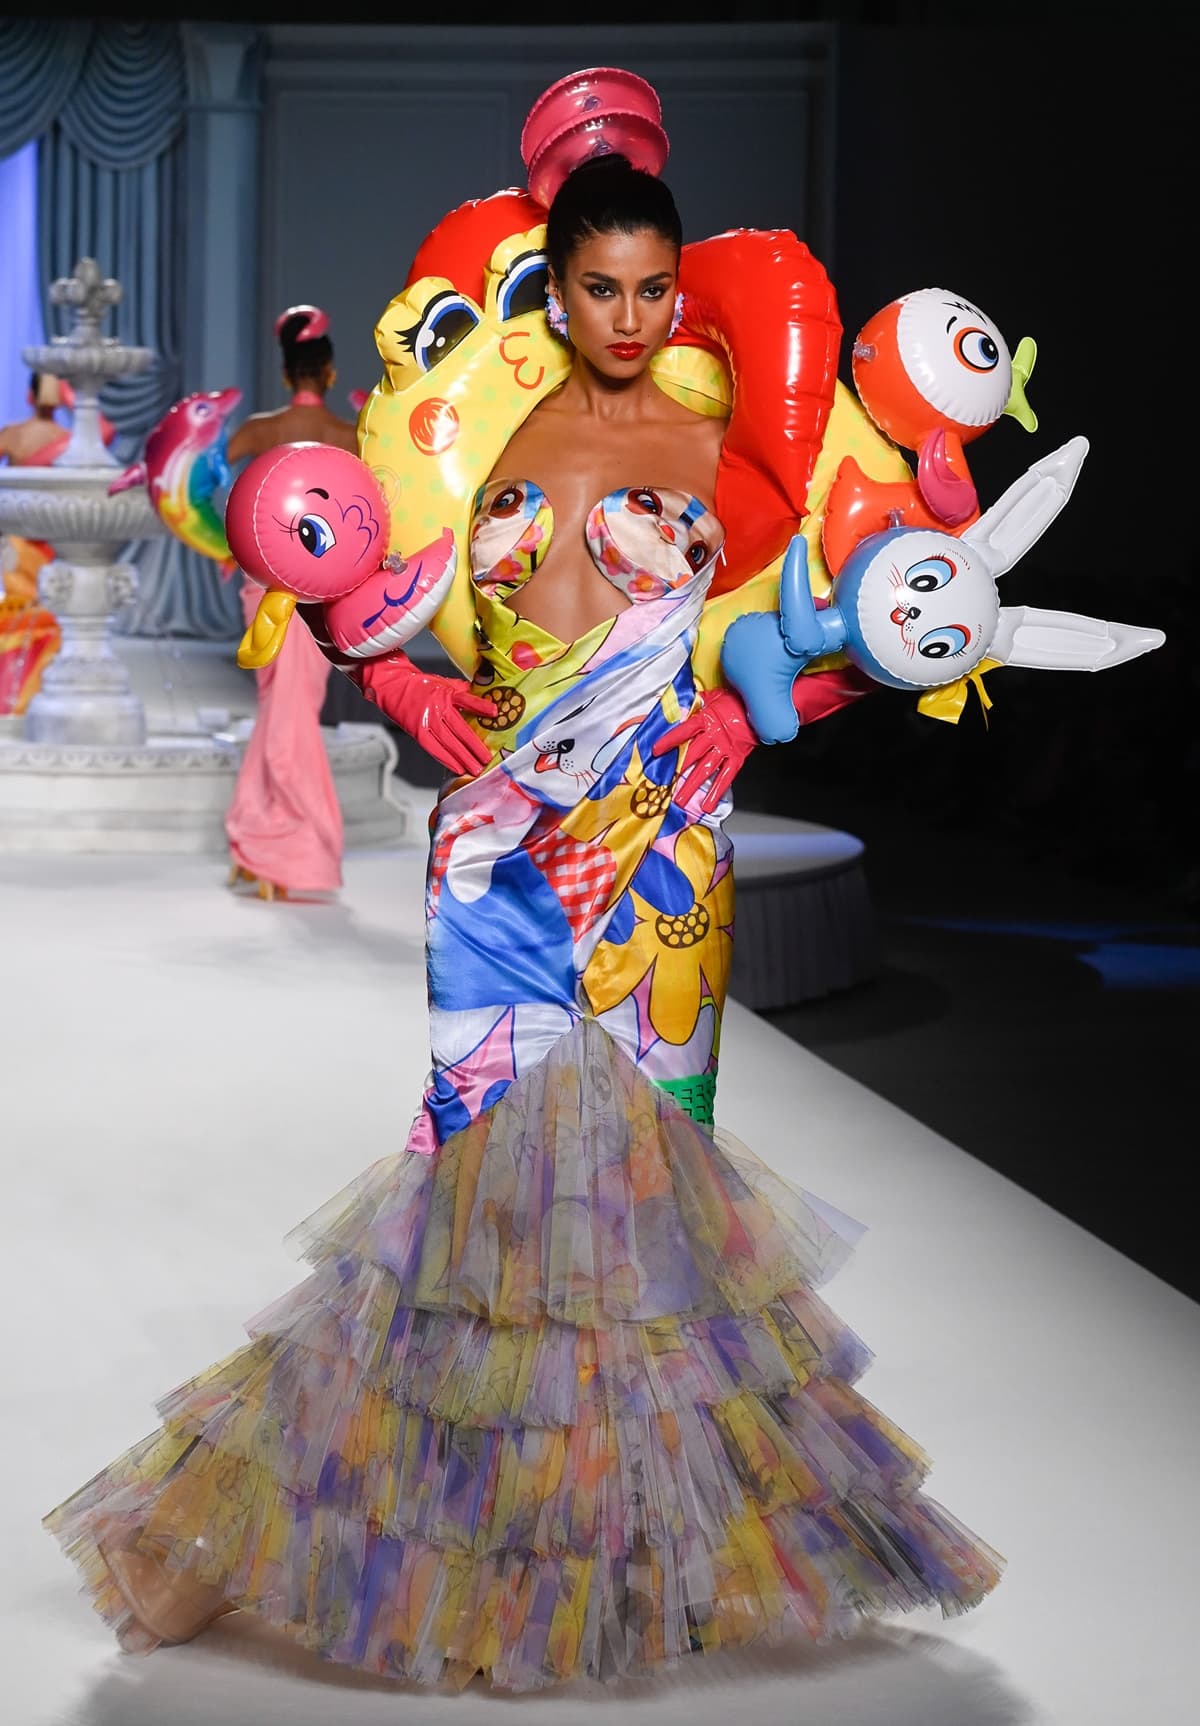 Moschino's Spring/Summer 2023 collection, "Inflation Chic," by Jeremy Scott, humorously addressed the global economic climate by incorporating inflatable pool toys and accessories into playful, joyous runway designs